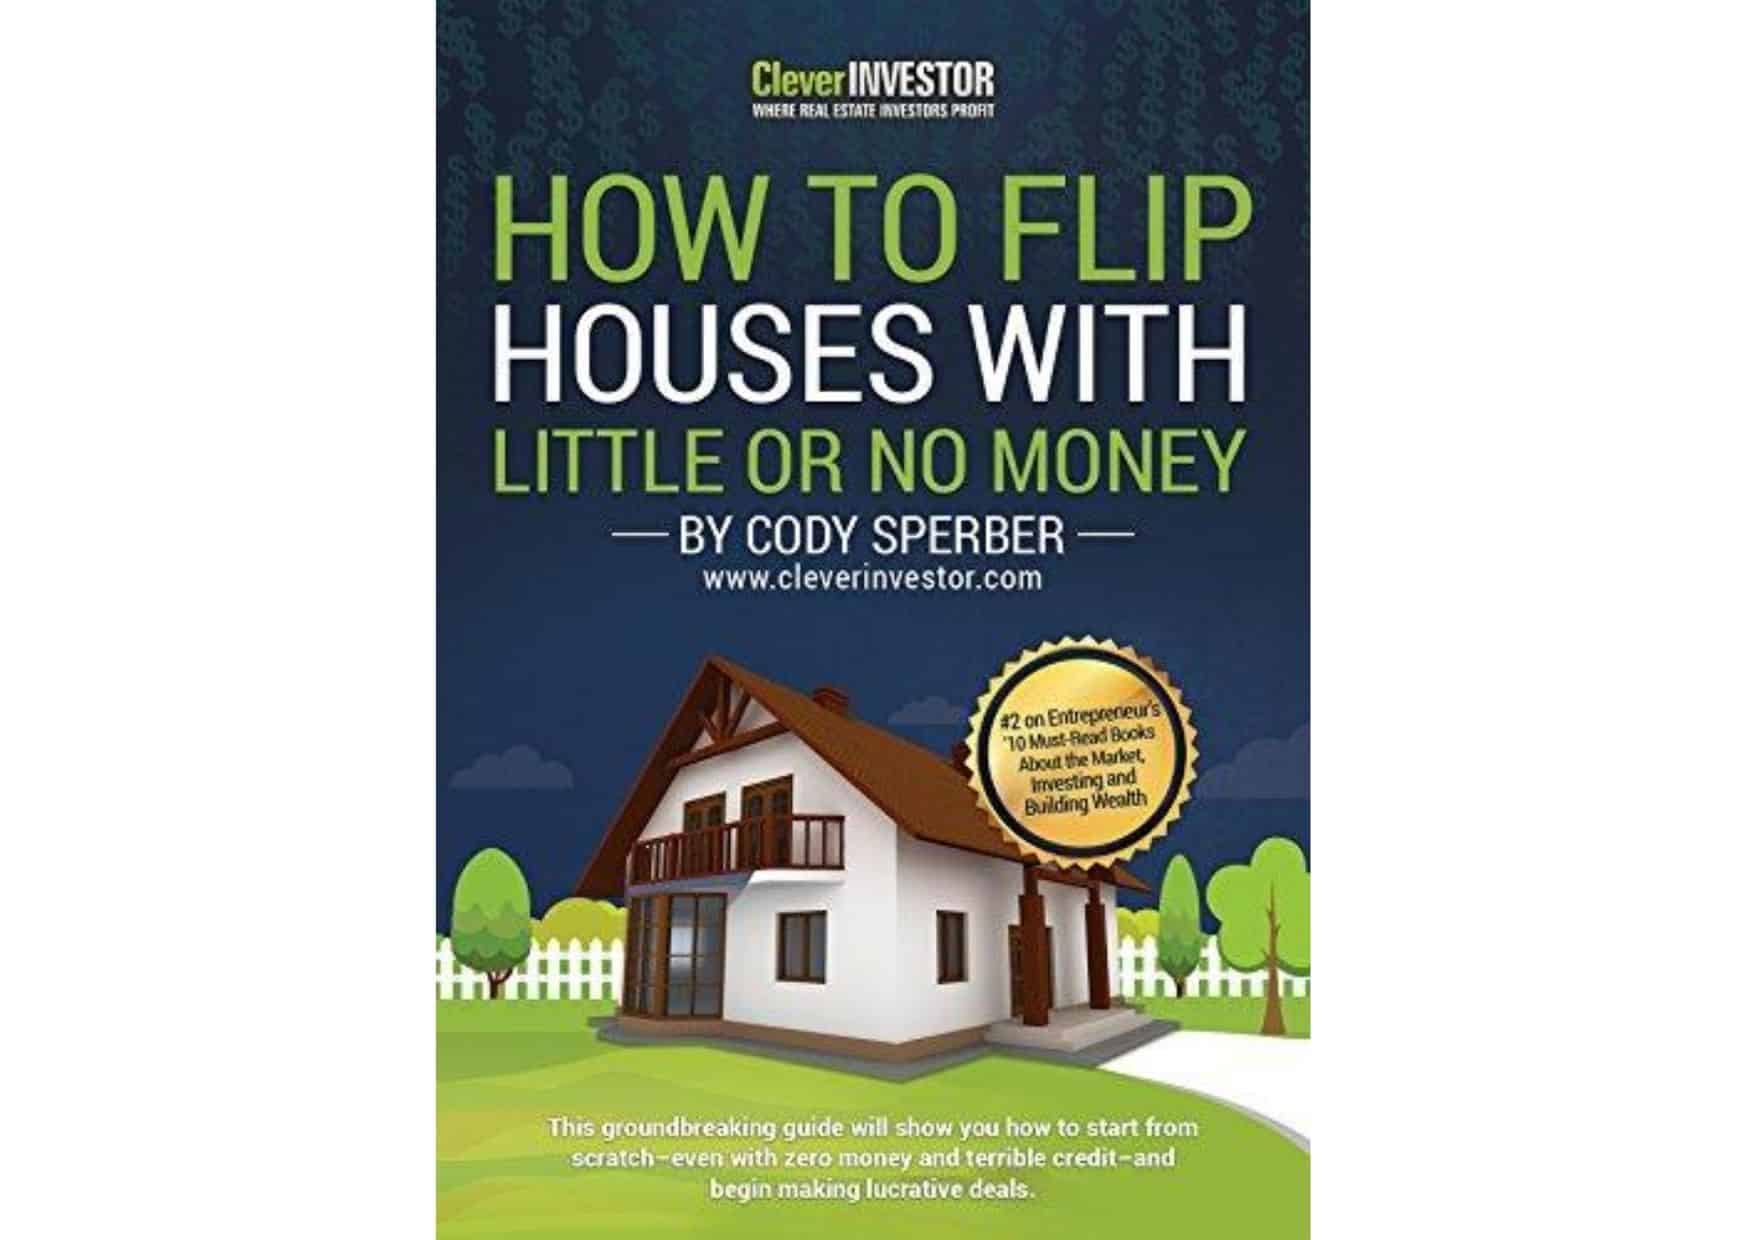 real estate investing for beginners pdf merge